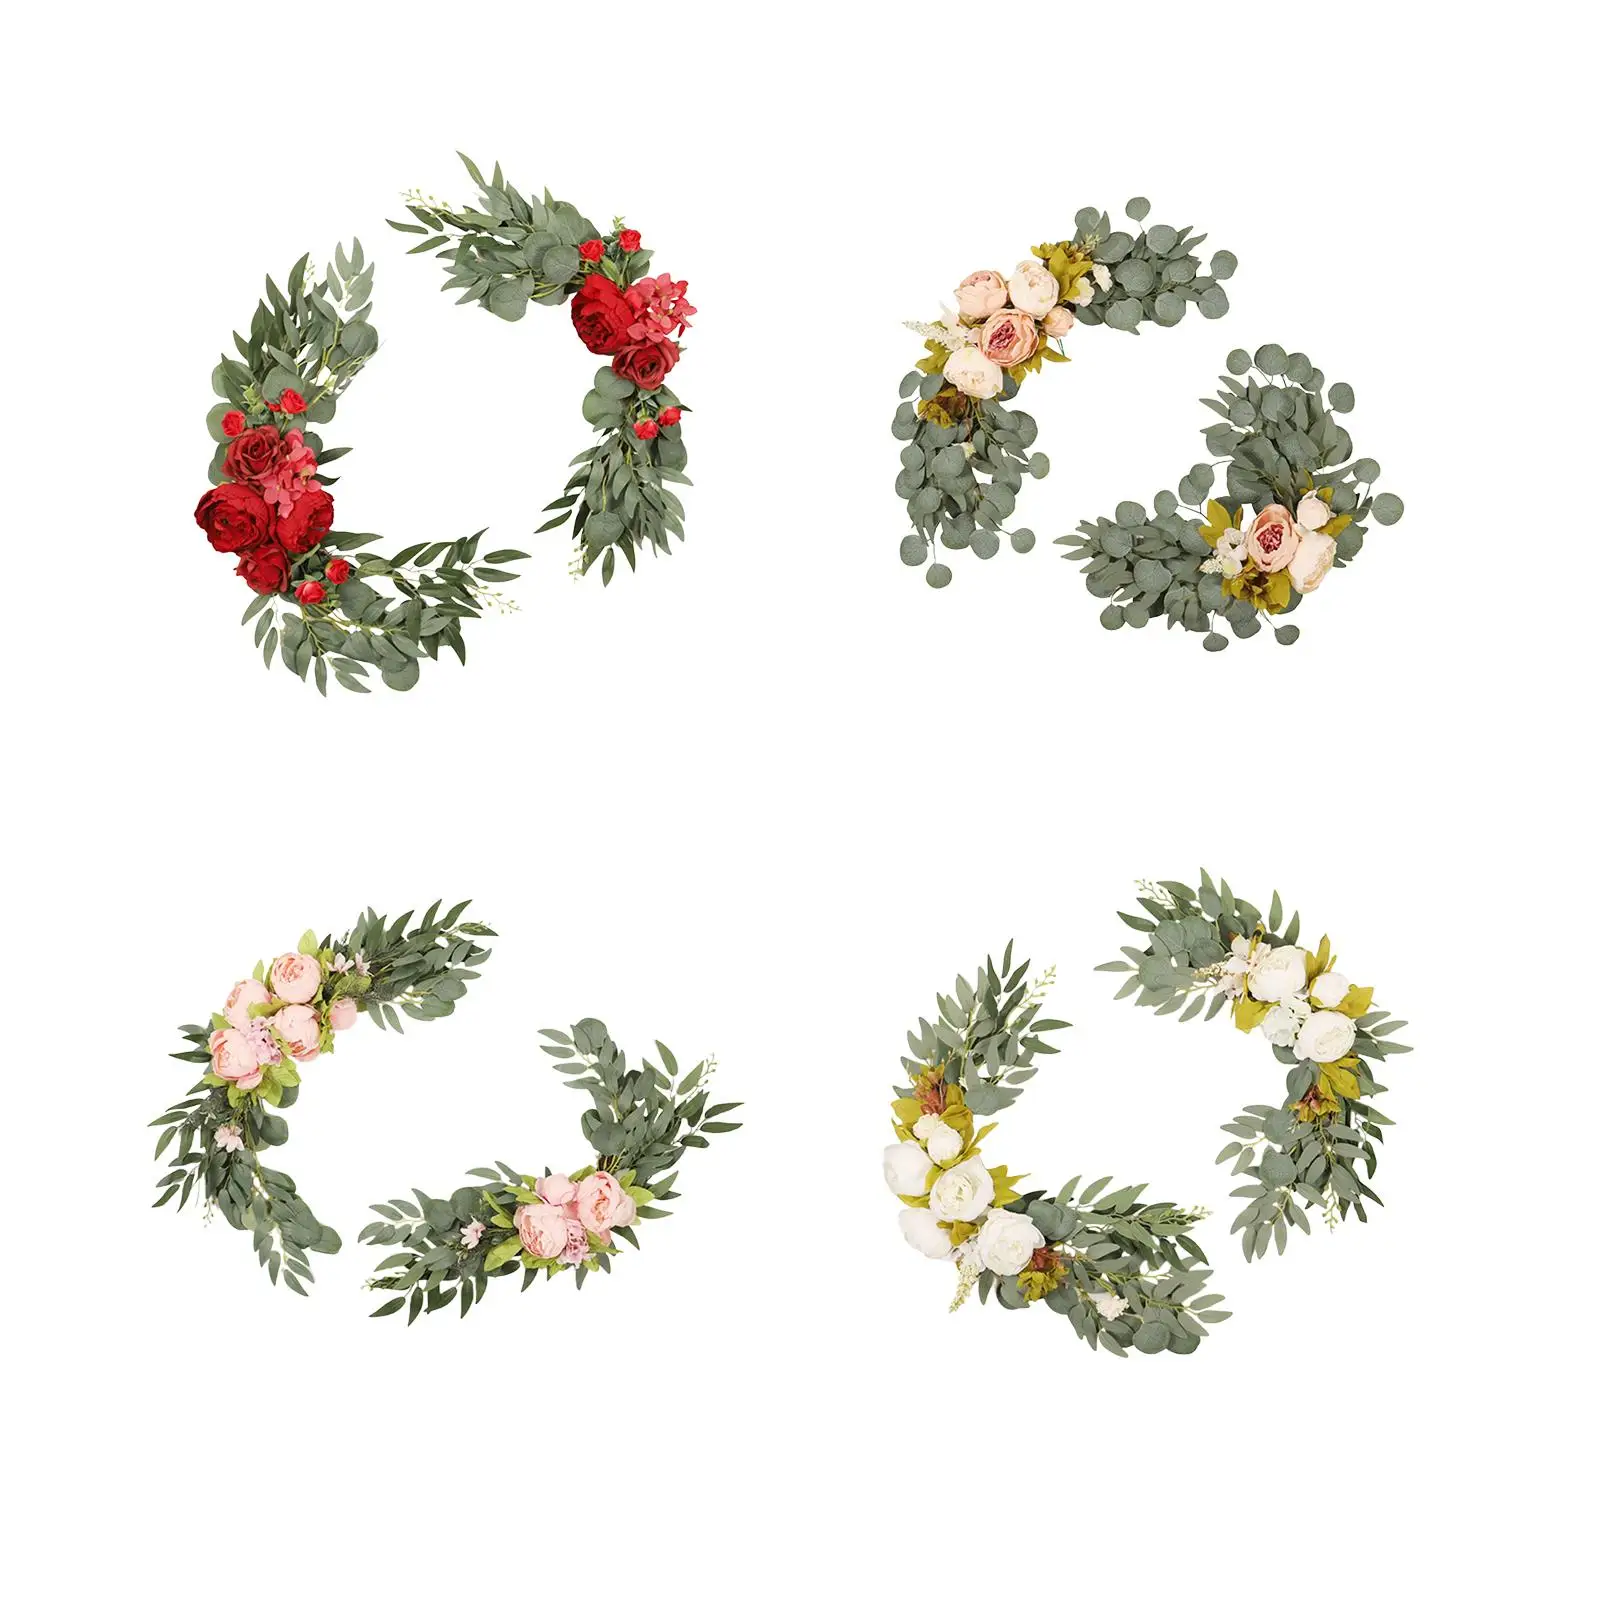 2Pcs Wedding Arch Flowers Handmade Hanging Wreath Flowers Backdrop Garlands Floral for Ceremony Craft Art Arch Front Door Wall